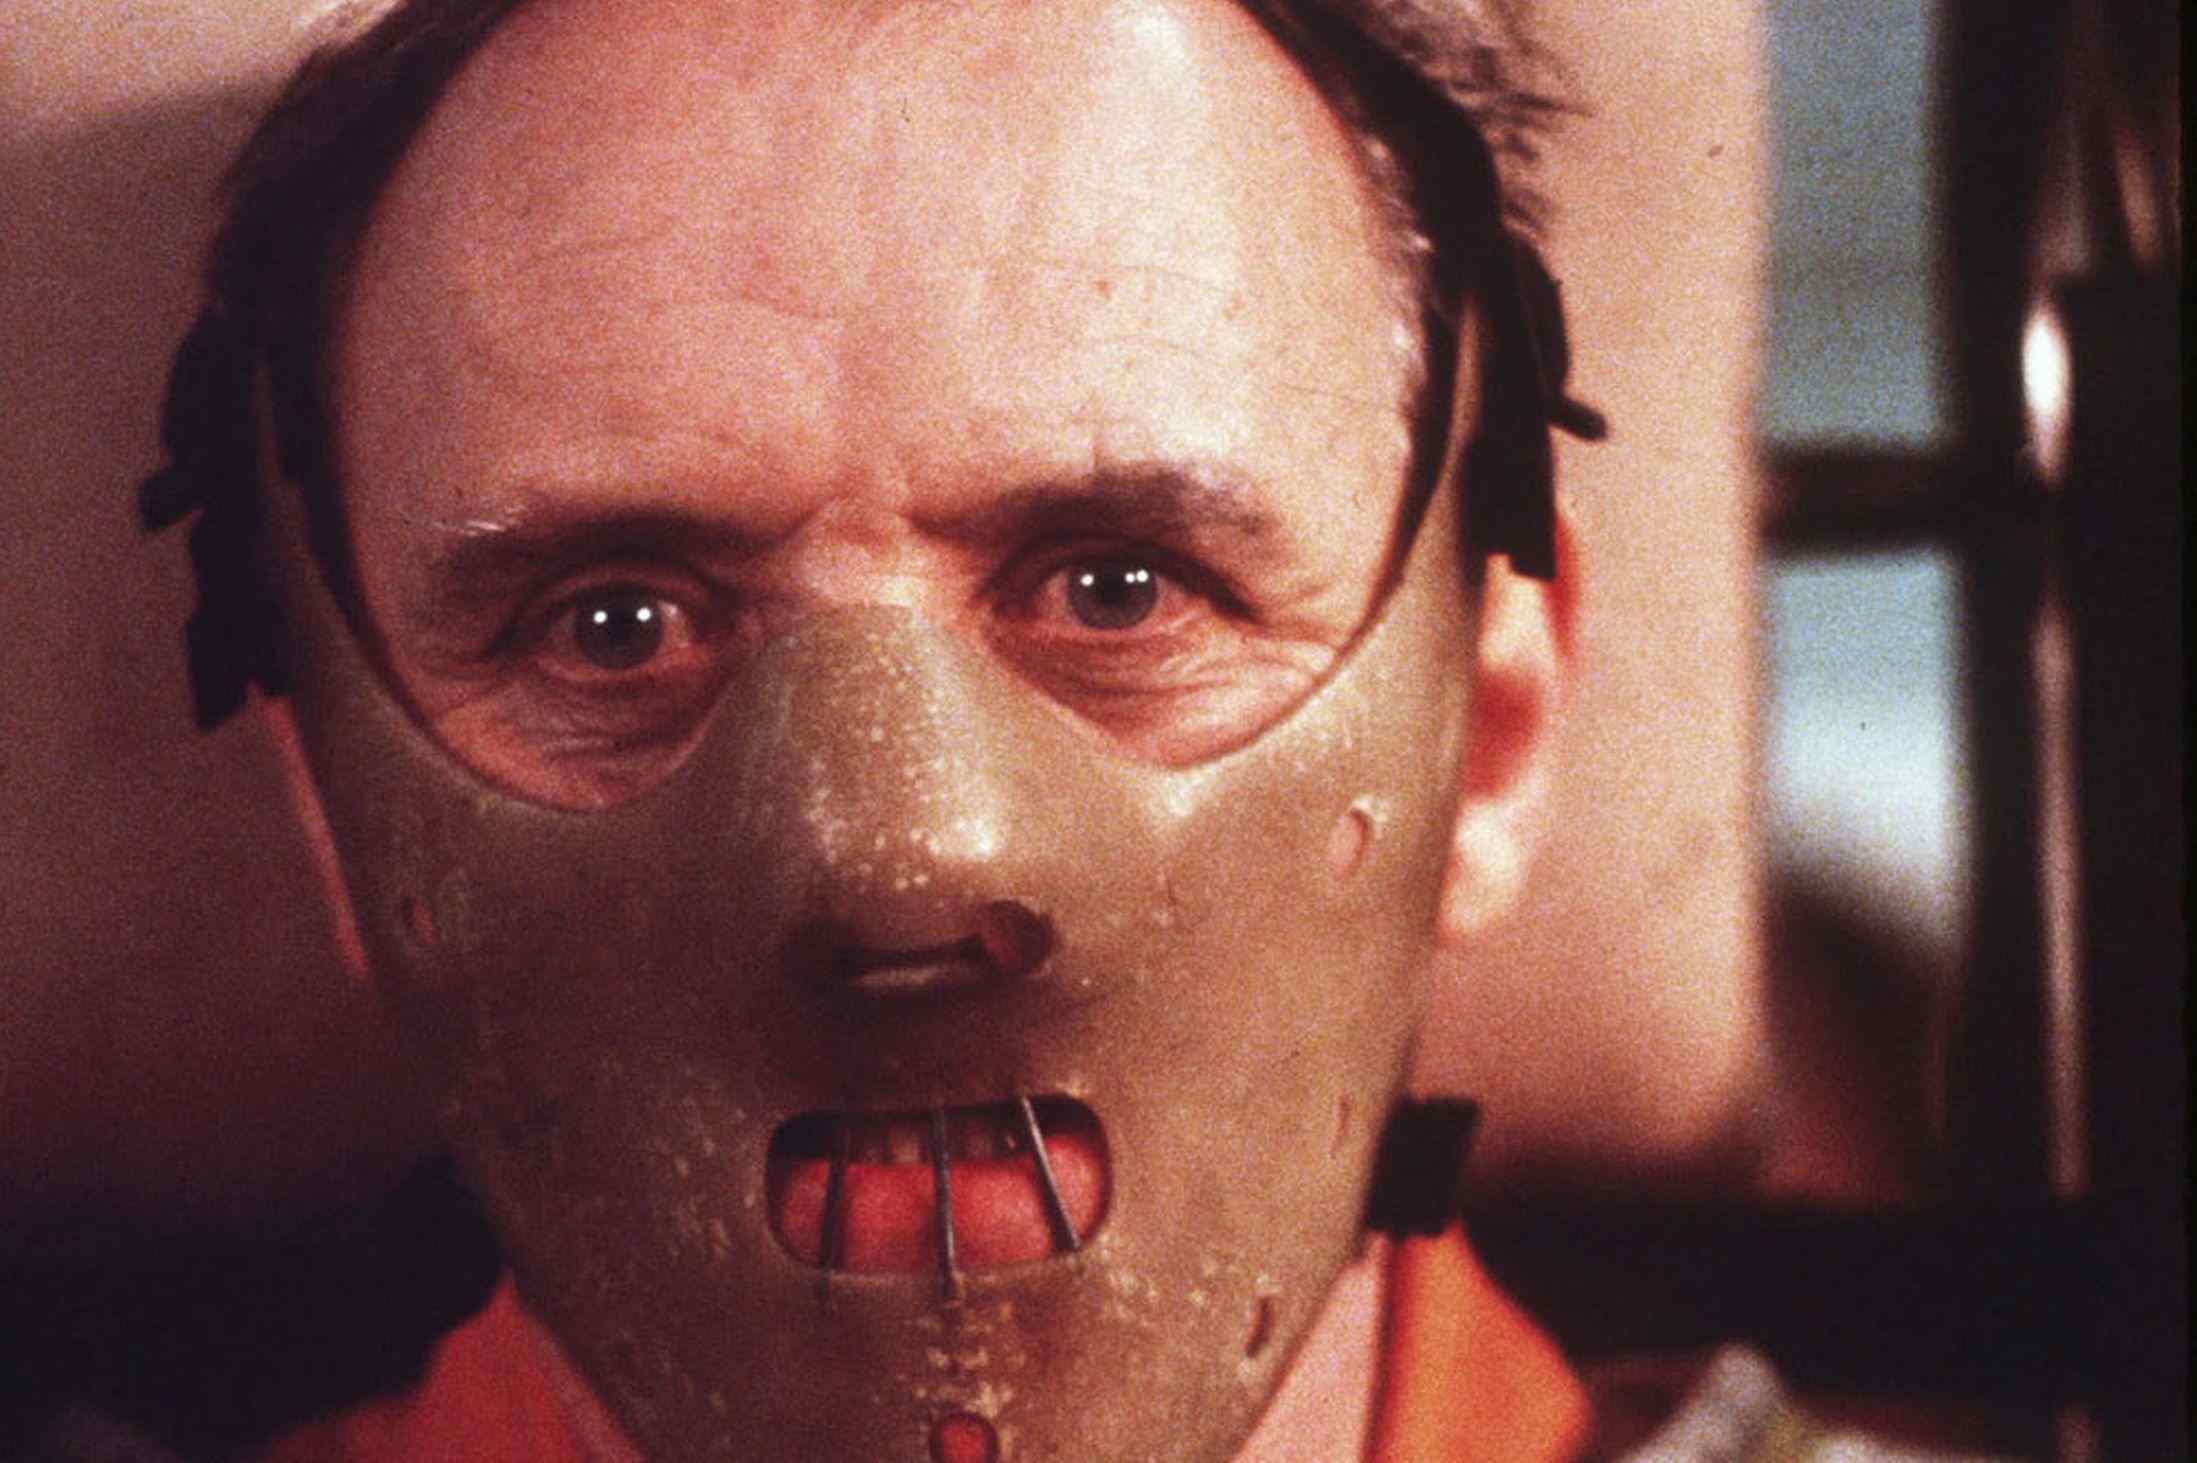 Anthony Hopkins in the hit movie The Silence of the Lambs.